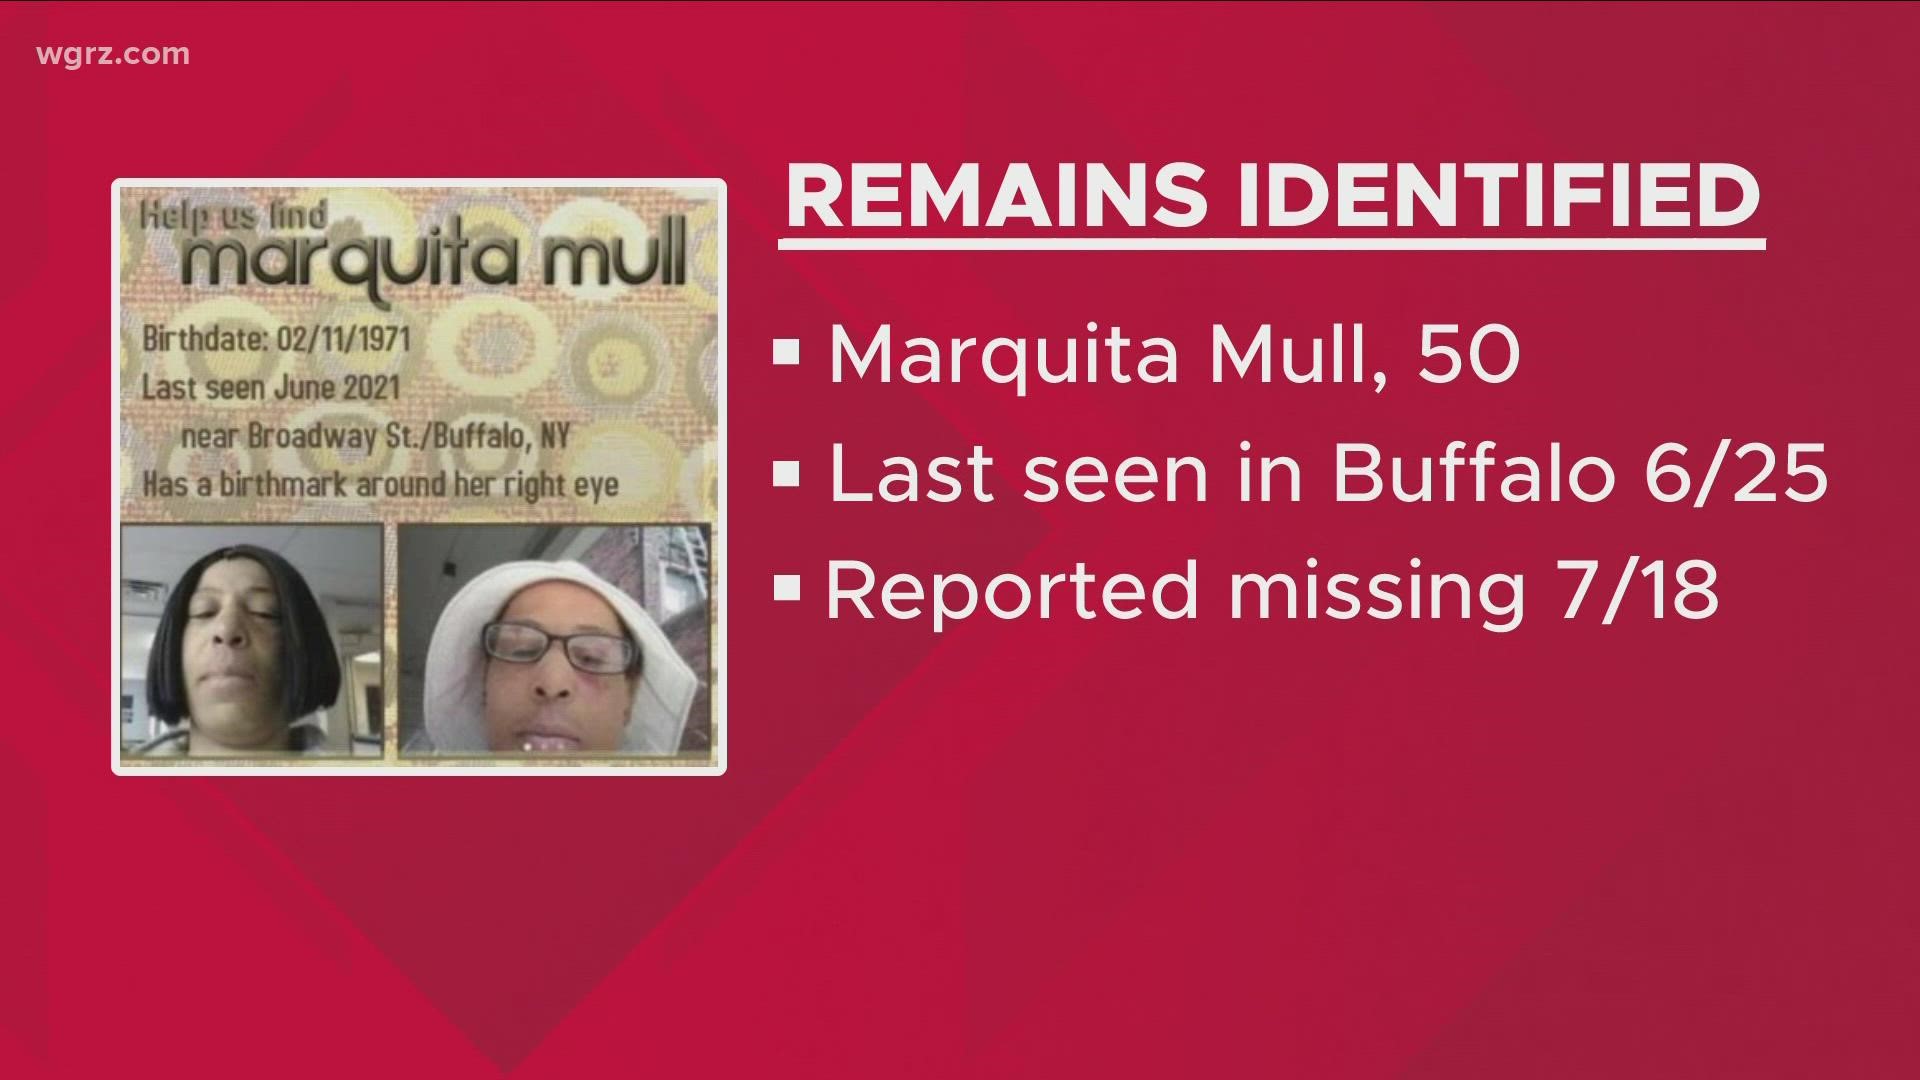 Mull was last seen in the Broadway-Fillmore area of Buffalo on June 25...and reported missing July 18th.